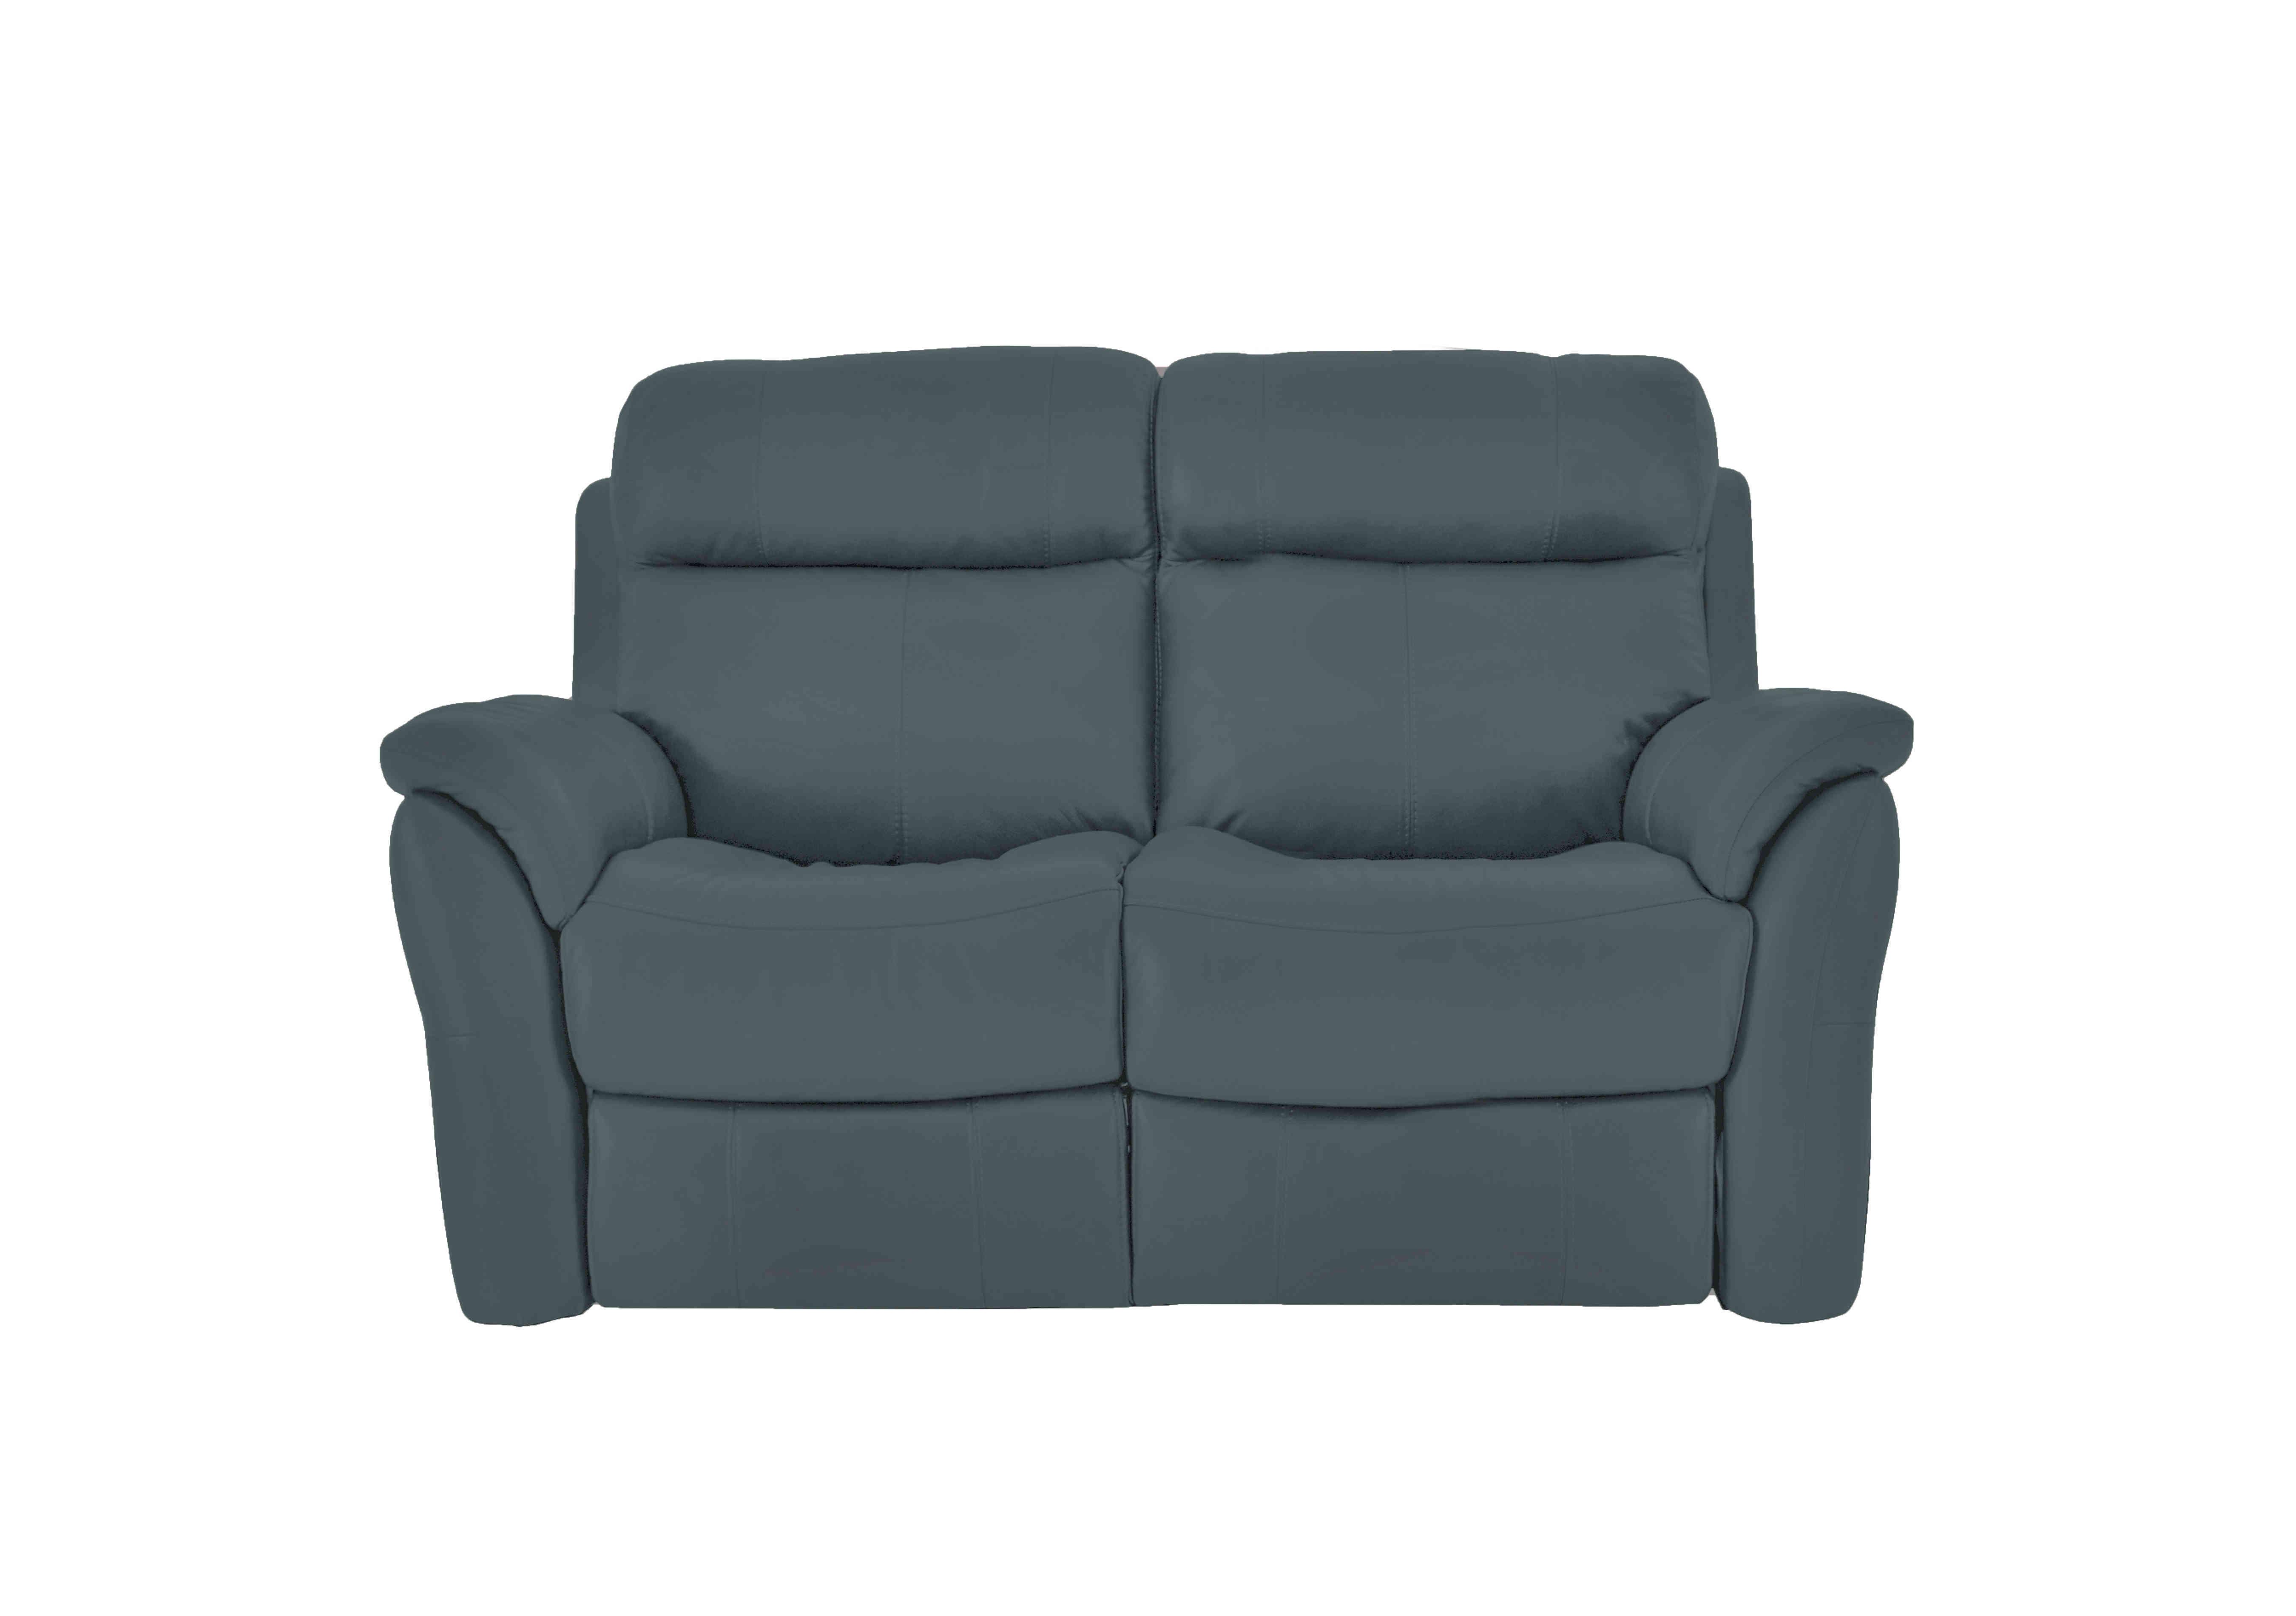 Relax Station Revive 2 Seater Leather Sofa in Bv-301e Lake Green on Furniture Village